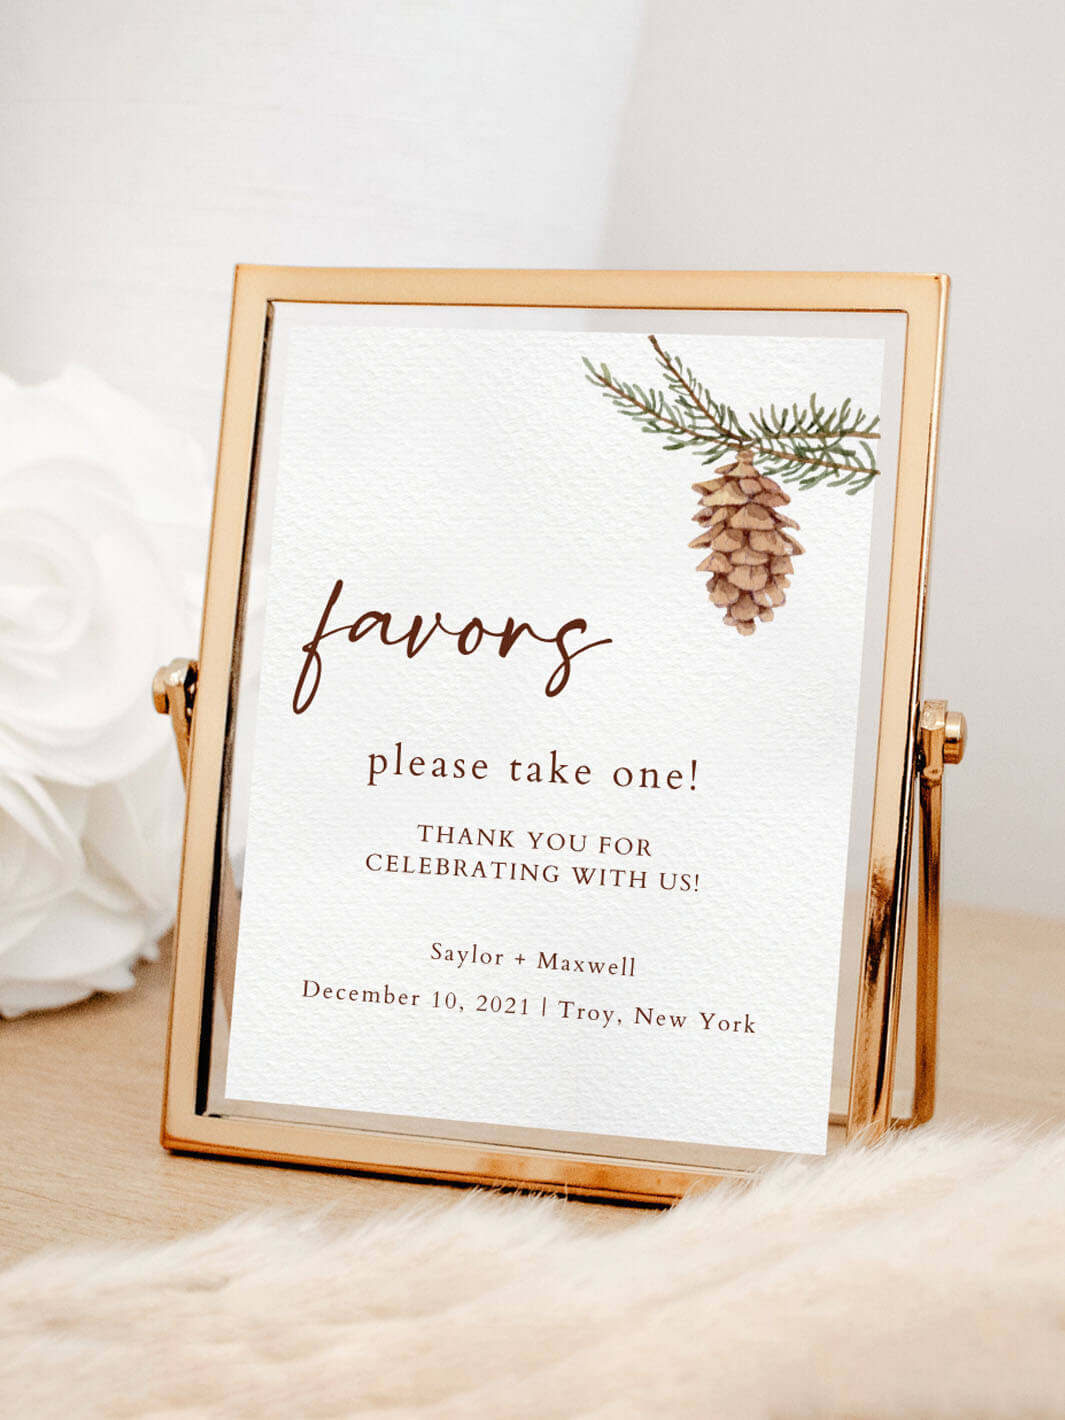 favors please take one wedding sign